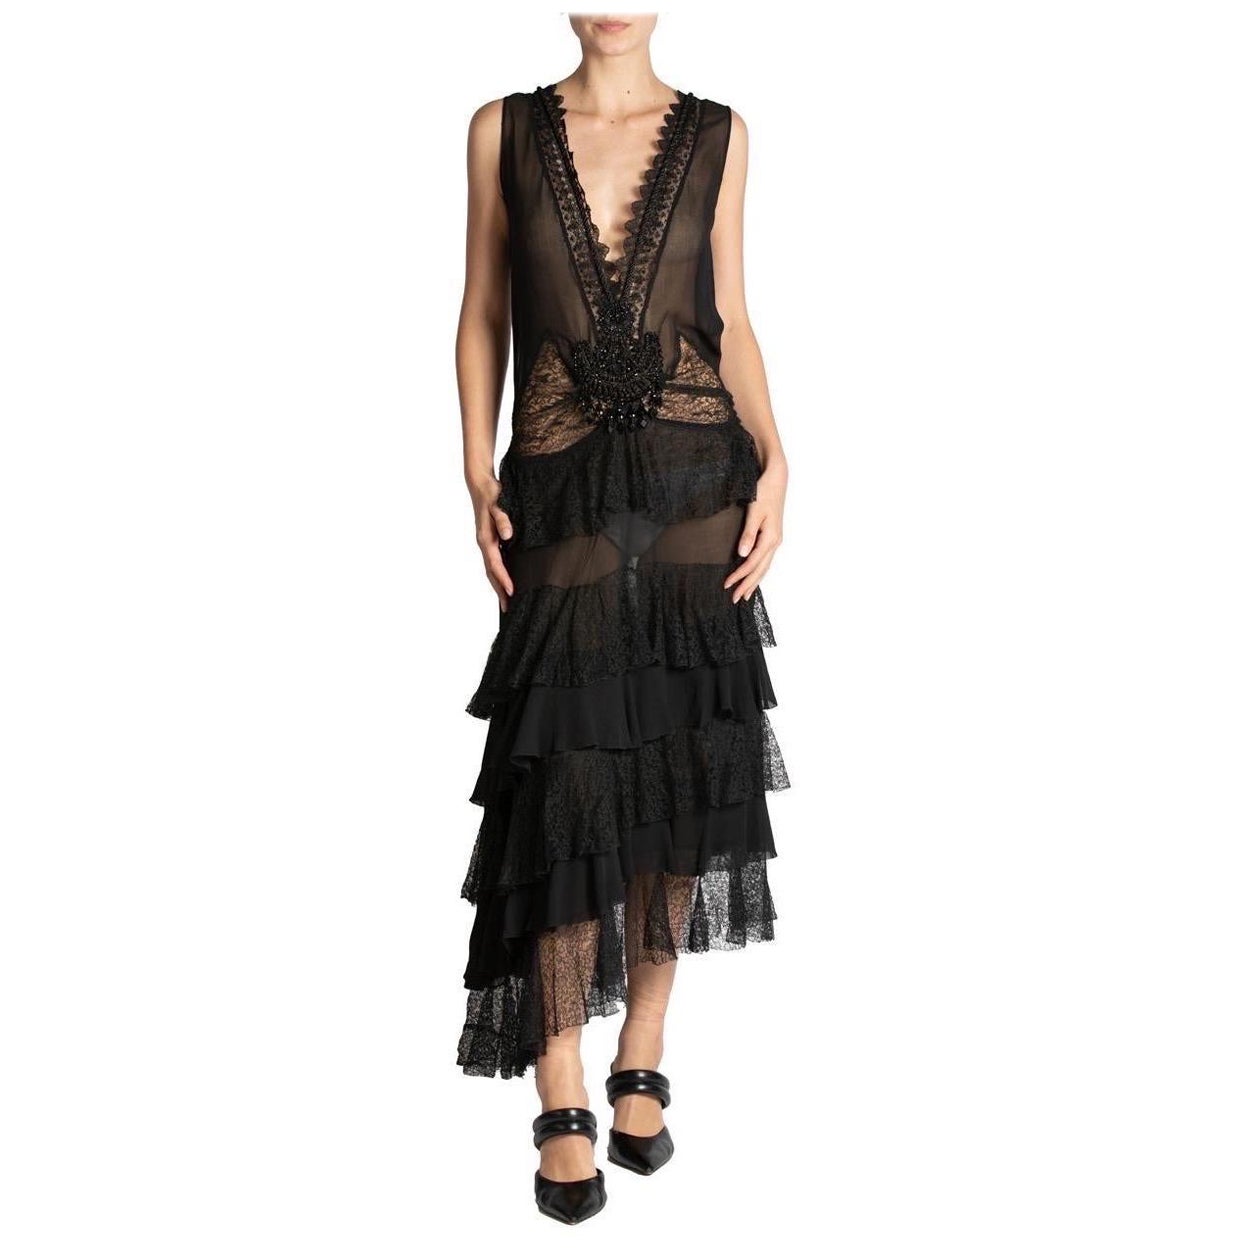 MORPHEW ATELIER Black Low Cut Silk Chiffon & Lace Ruffled Dress With Victorian  For Sale